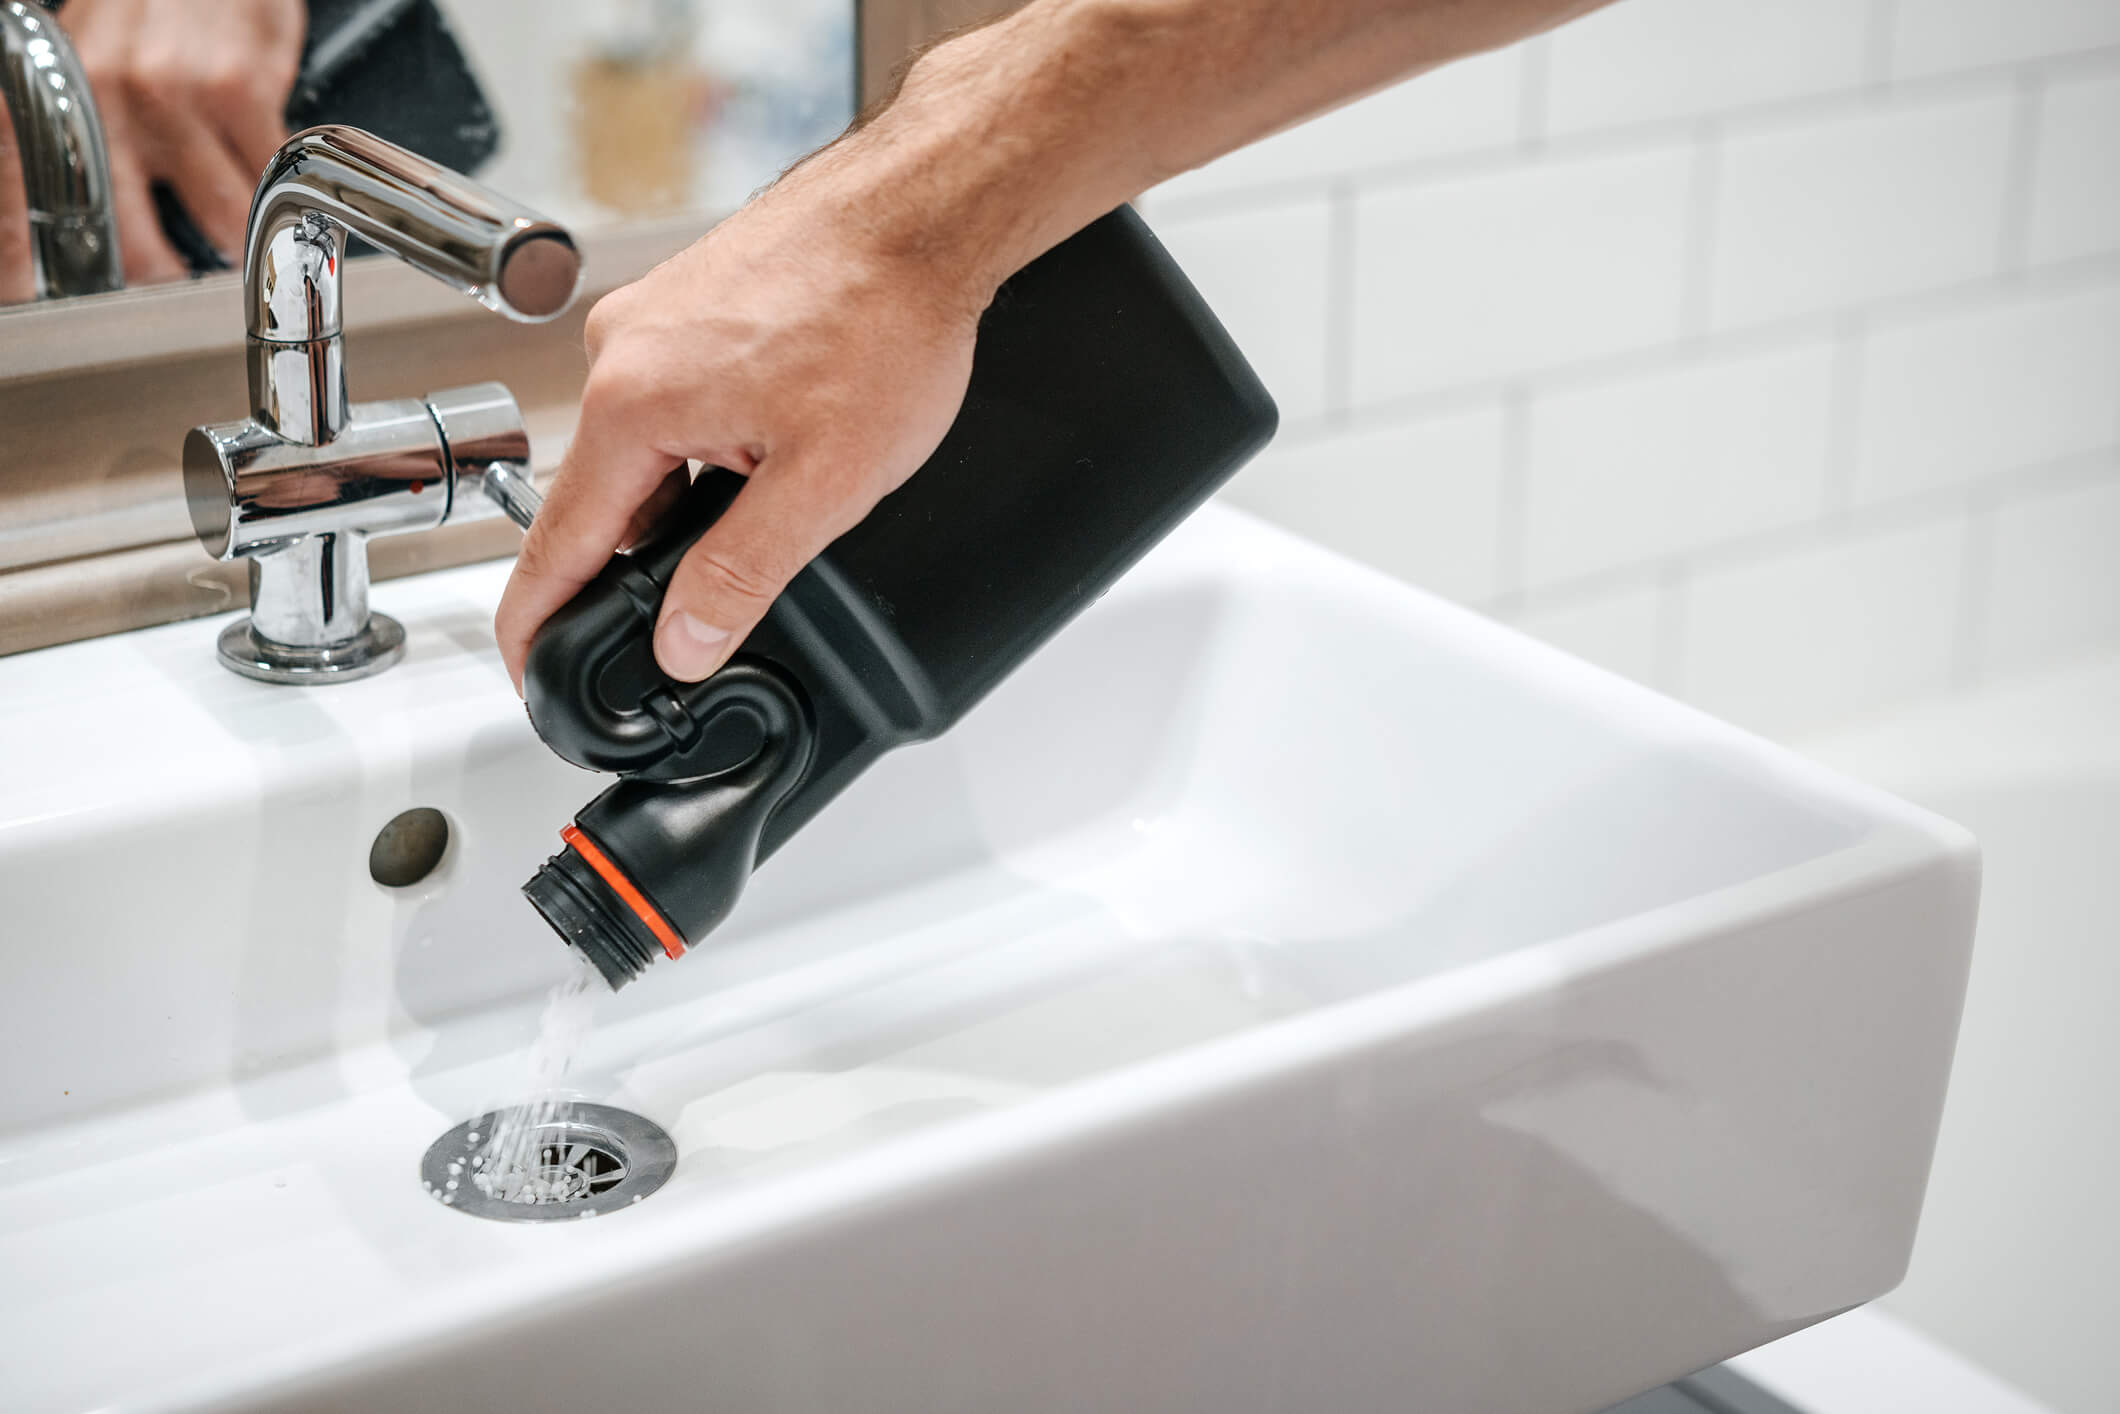 Why You Should Stop Using Drain Cleaners In Your Pipes Immediately